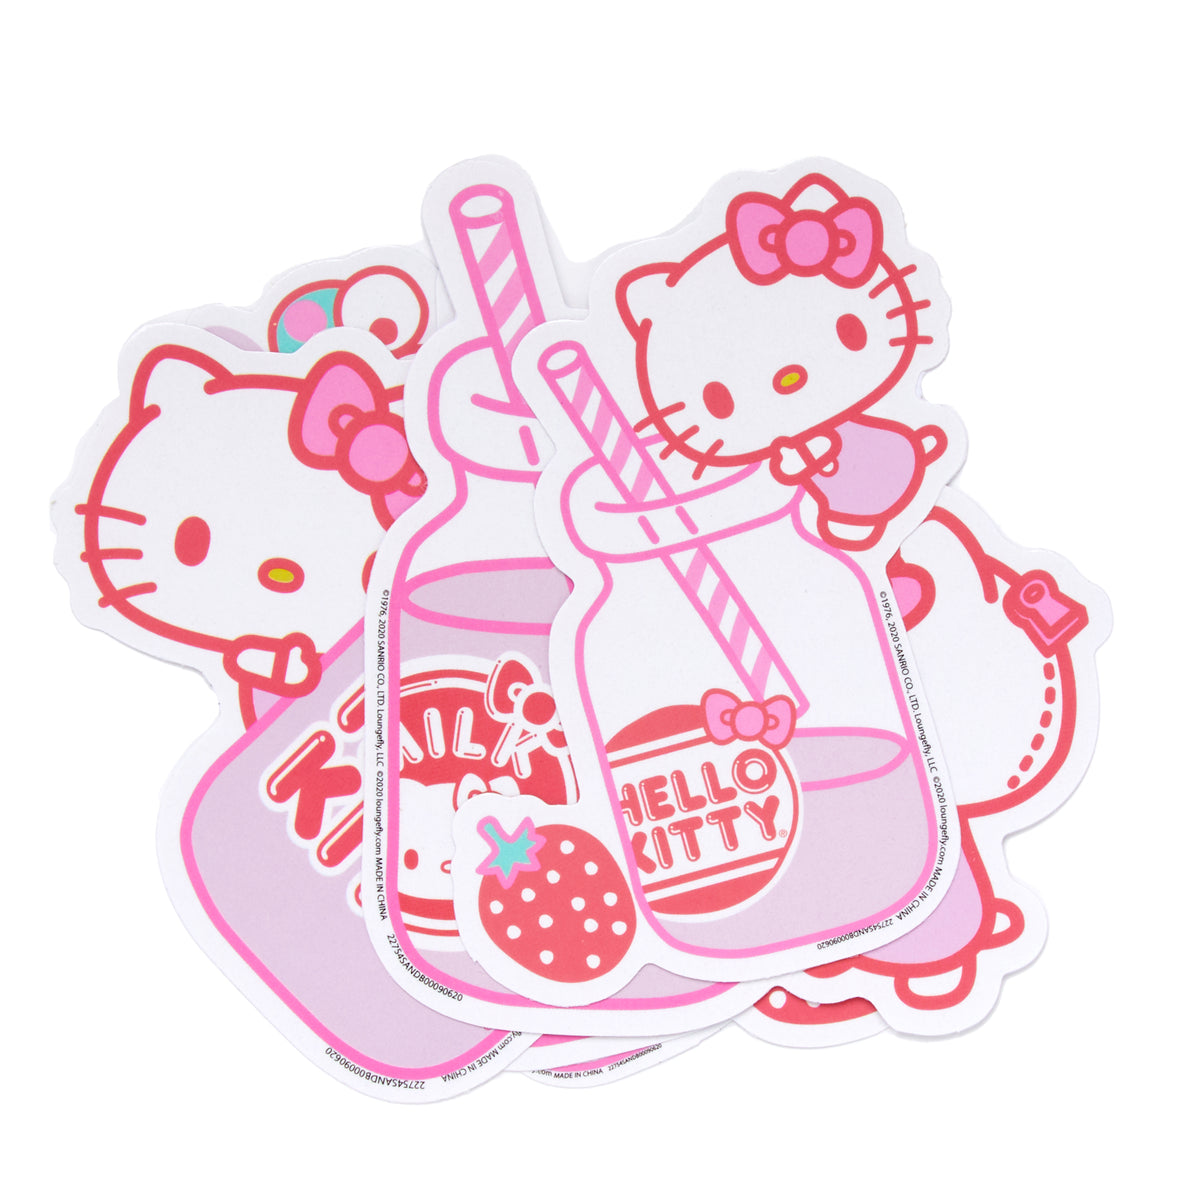 Hello Kitty and Friends 5-pc Sticker Pack (Strawberry Milk) Stationery Loungefly   